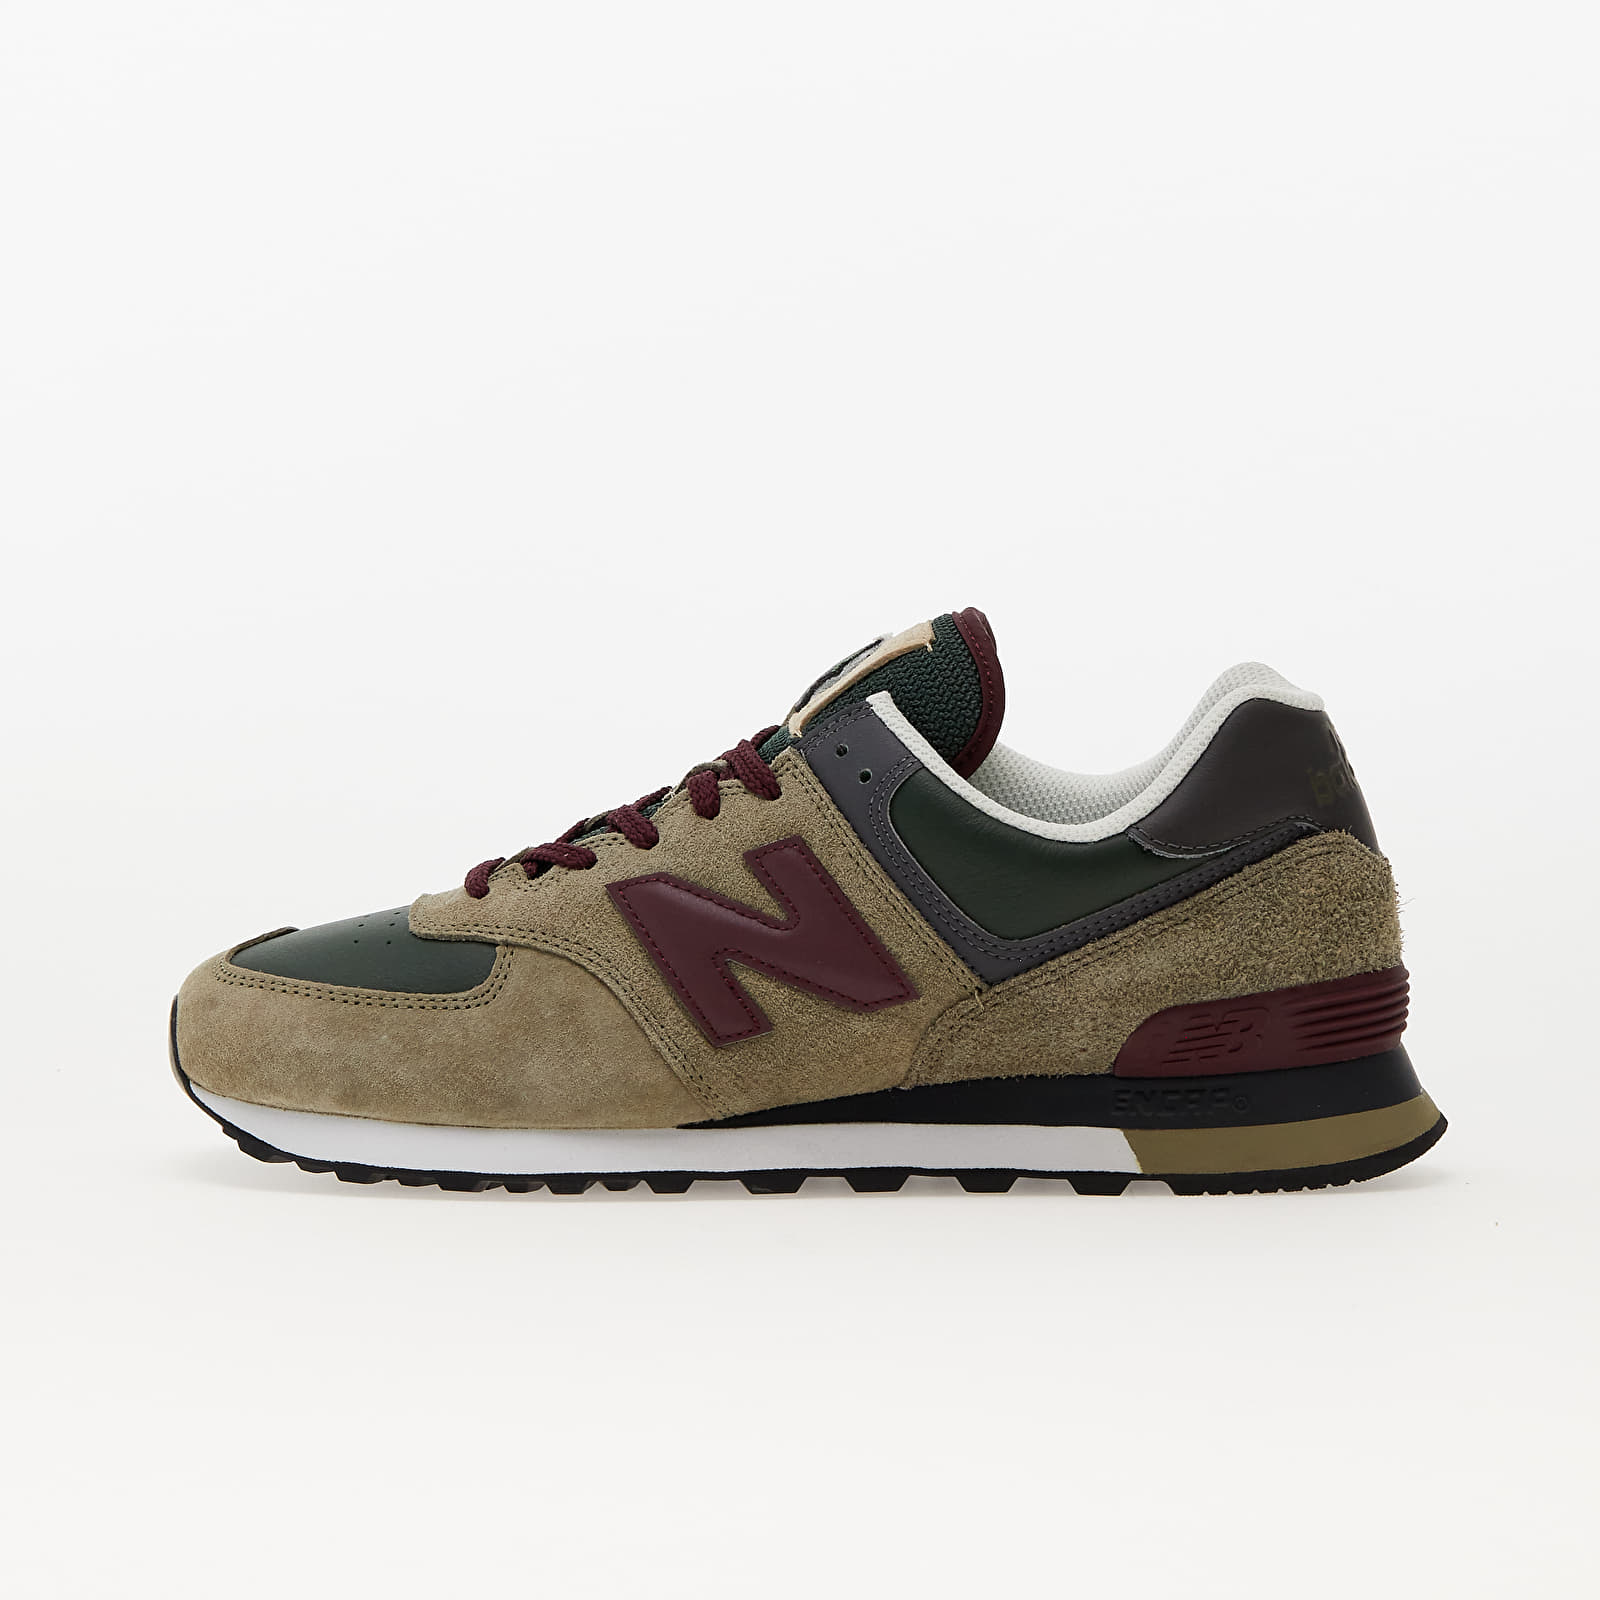 Men's sneakers and shoes New Balance 574 Khaki